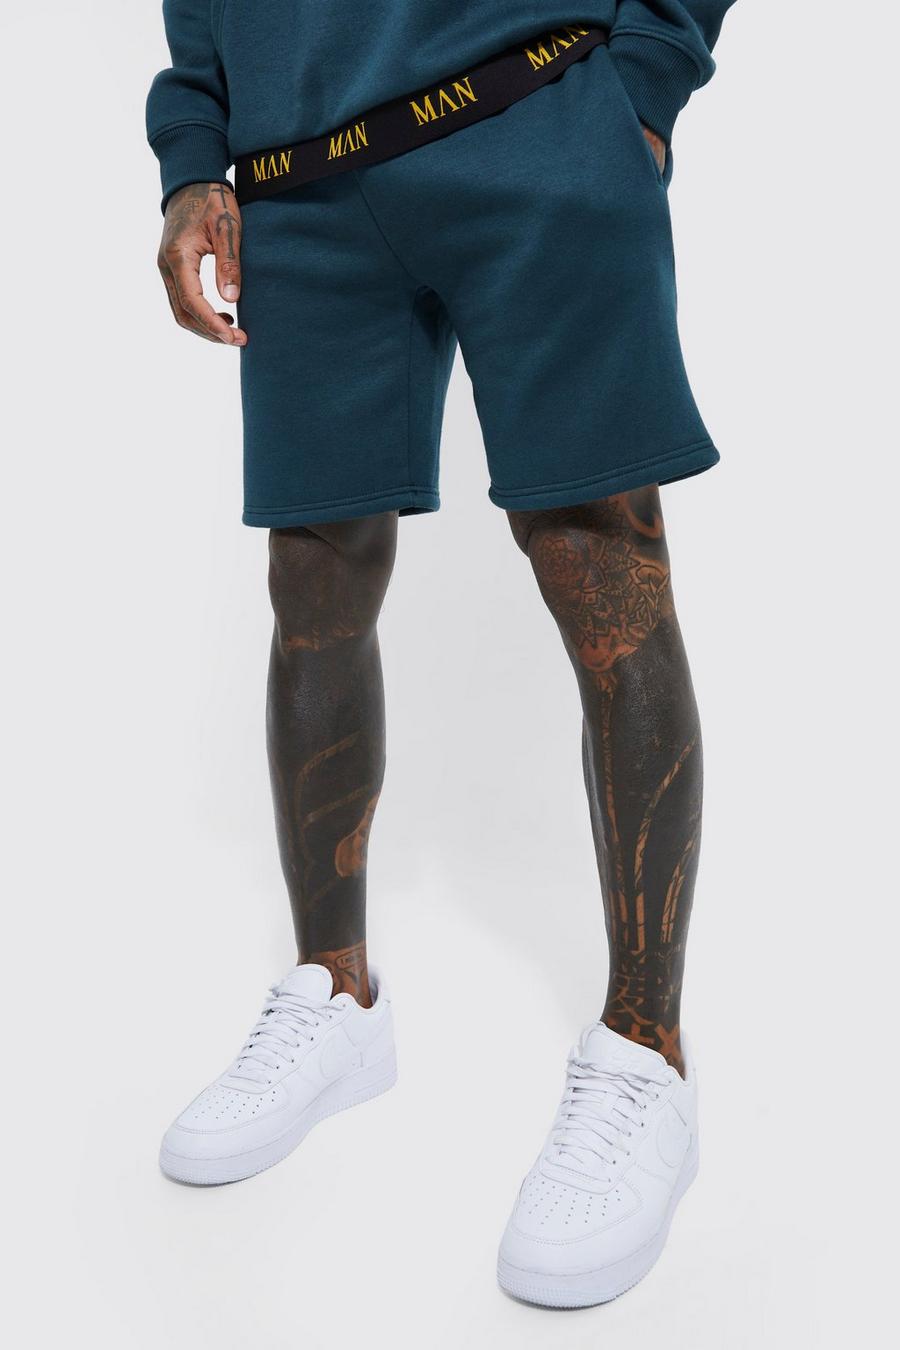 Teal Man Gold Loose Double Waistband Short image number 1